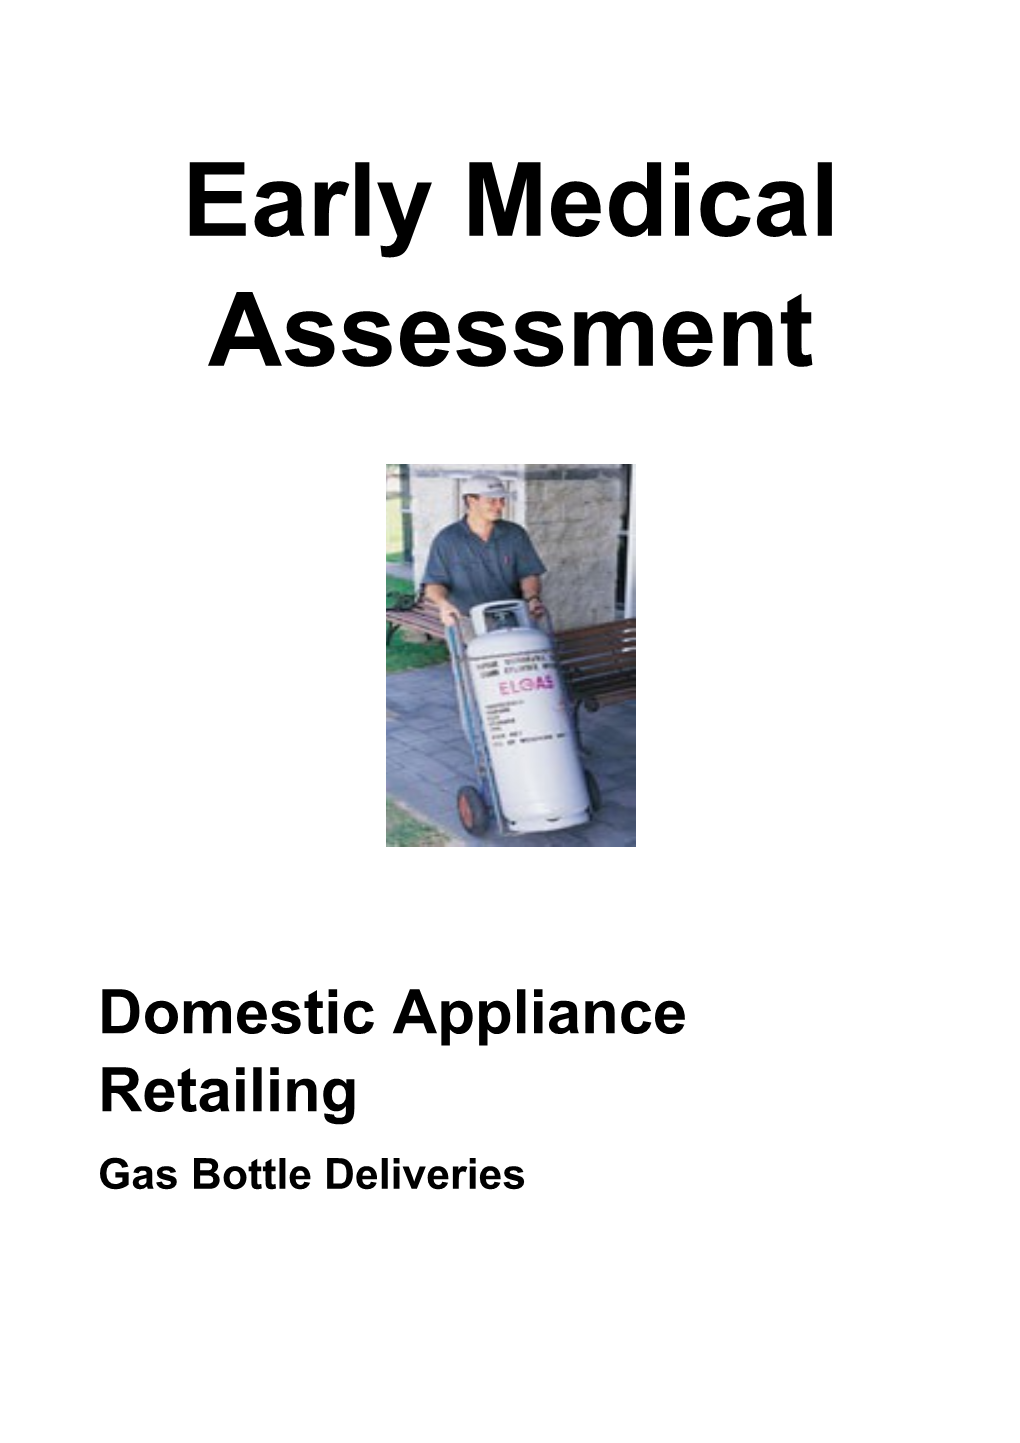 Domestic Appliance Retailing - Gas Bottle Delivery